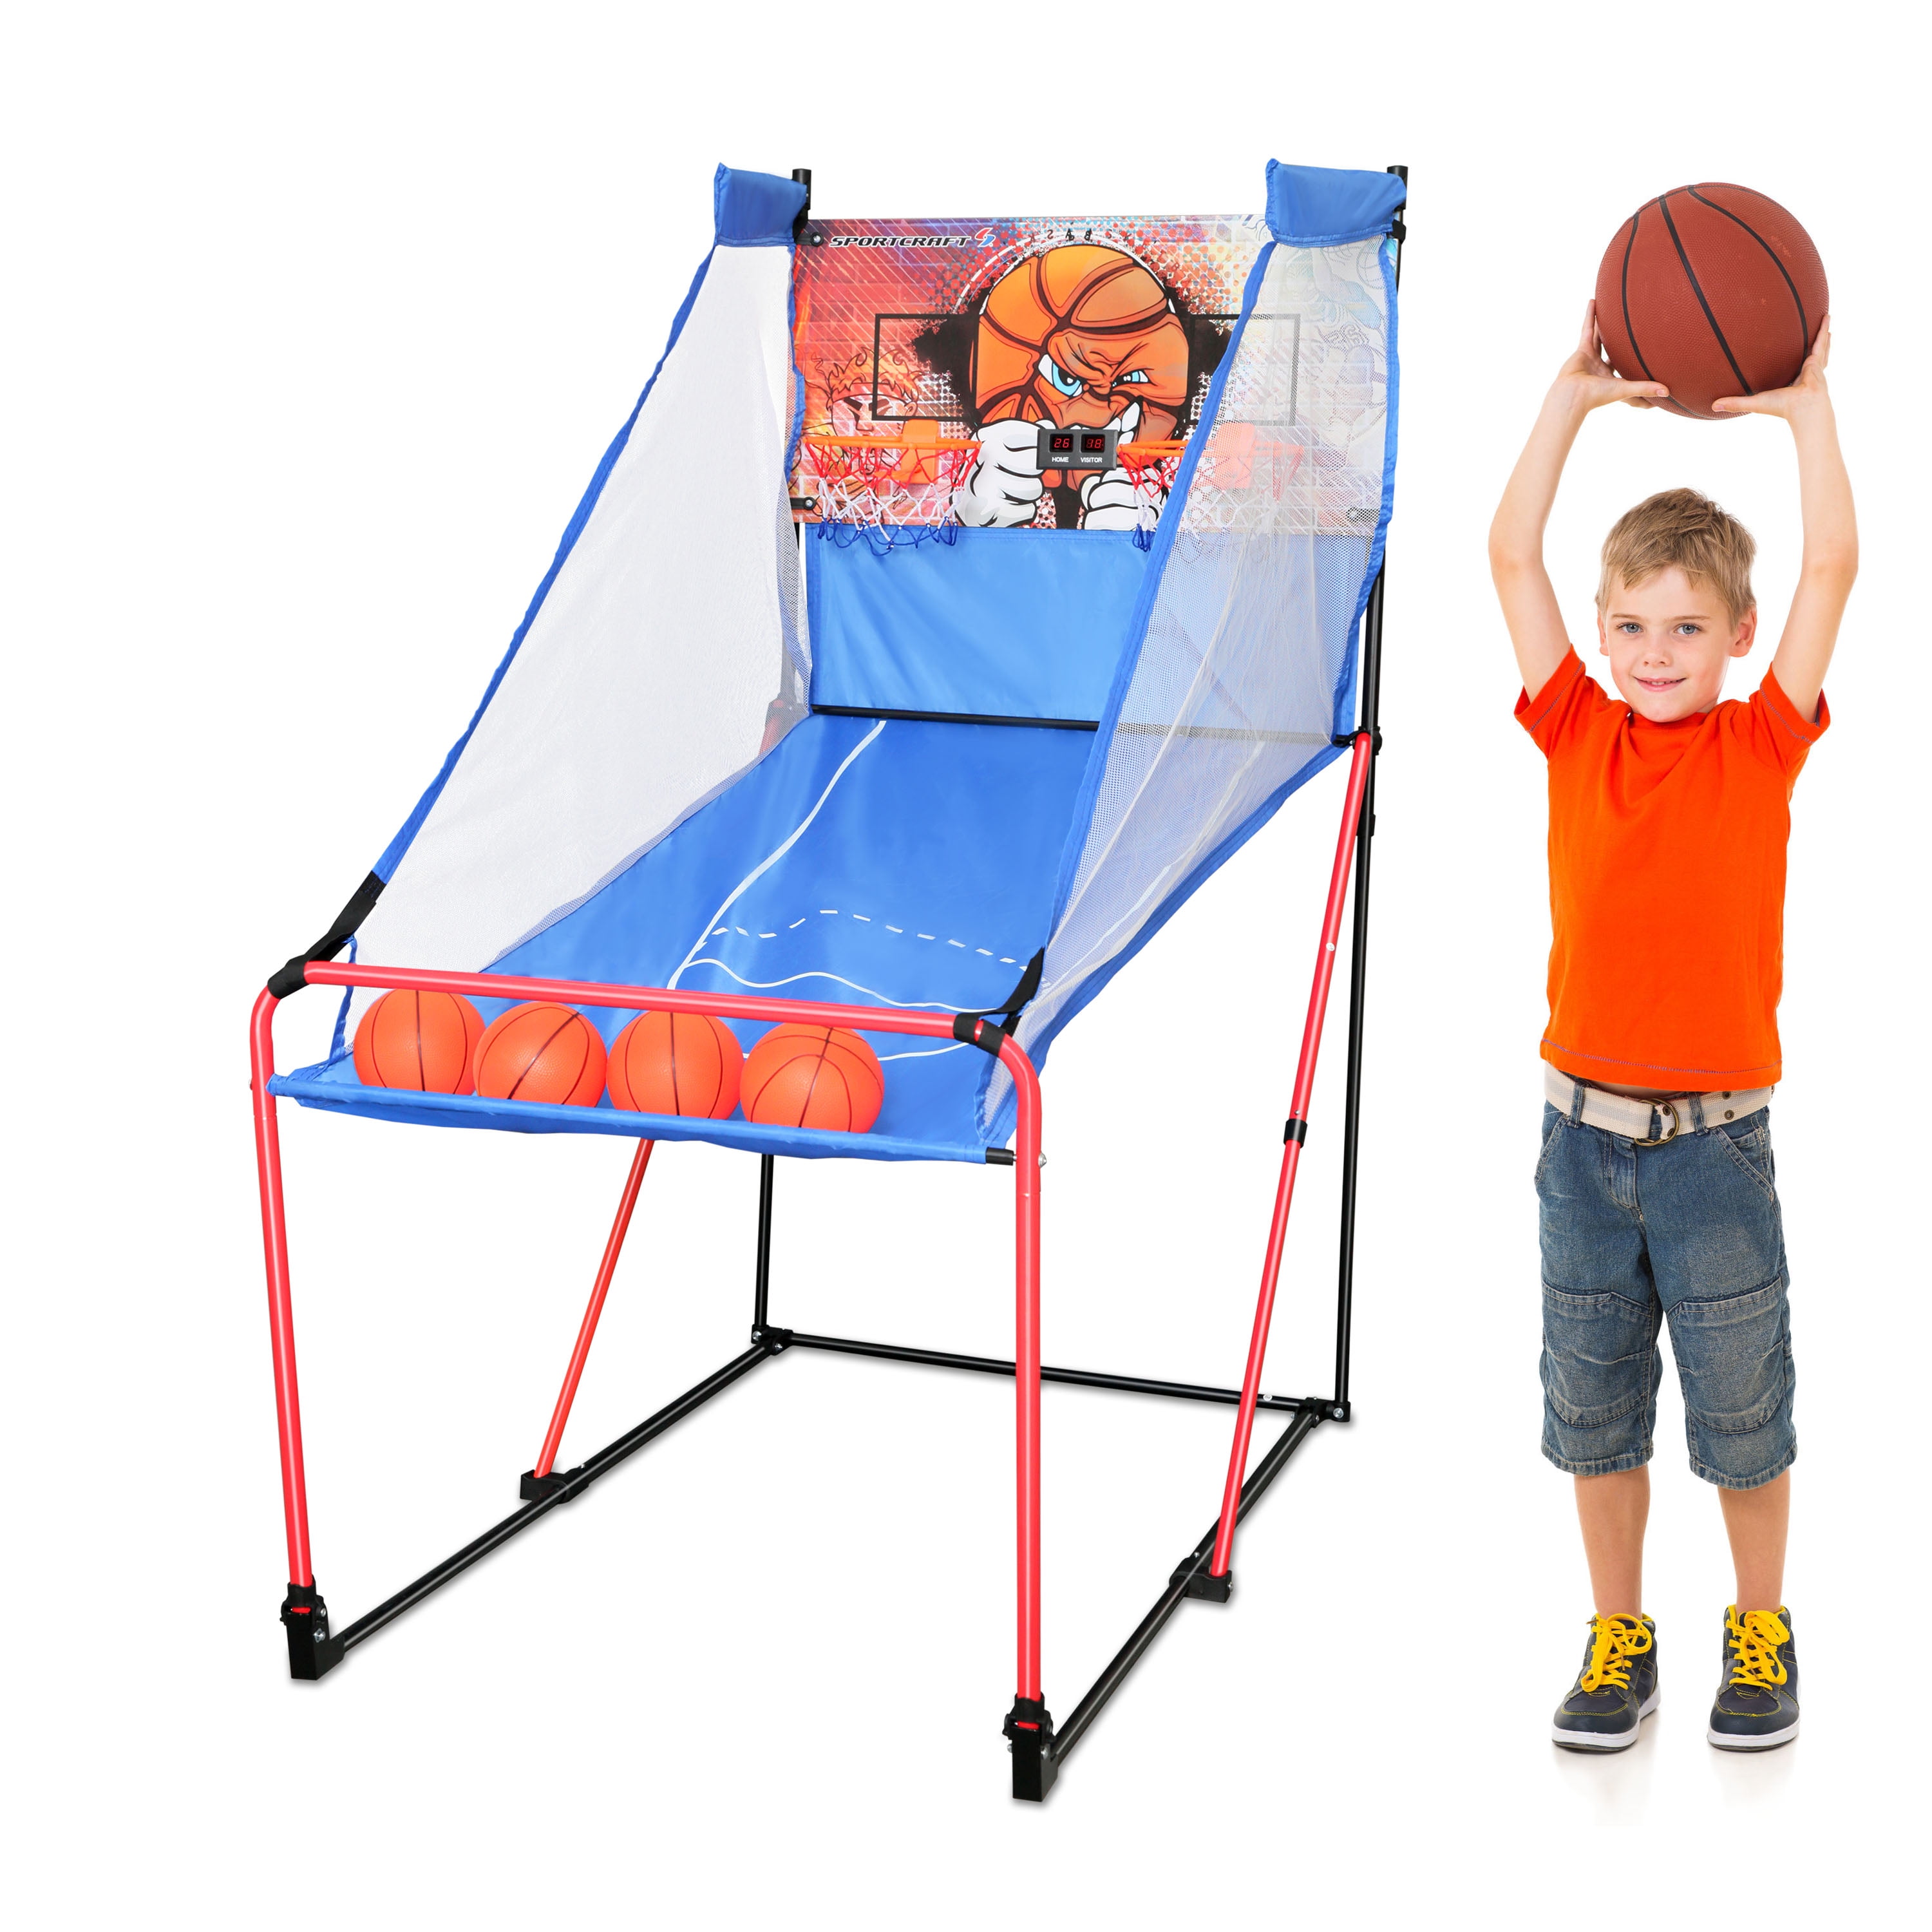 Photo 1 of ***MISSING HARDWARE*** Sportcraft Junior Portable Foldable Basketball Arcade Game w/Carry Bag